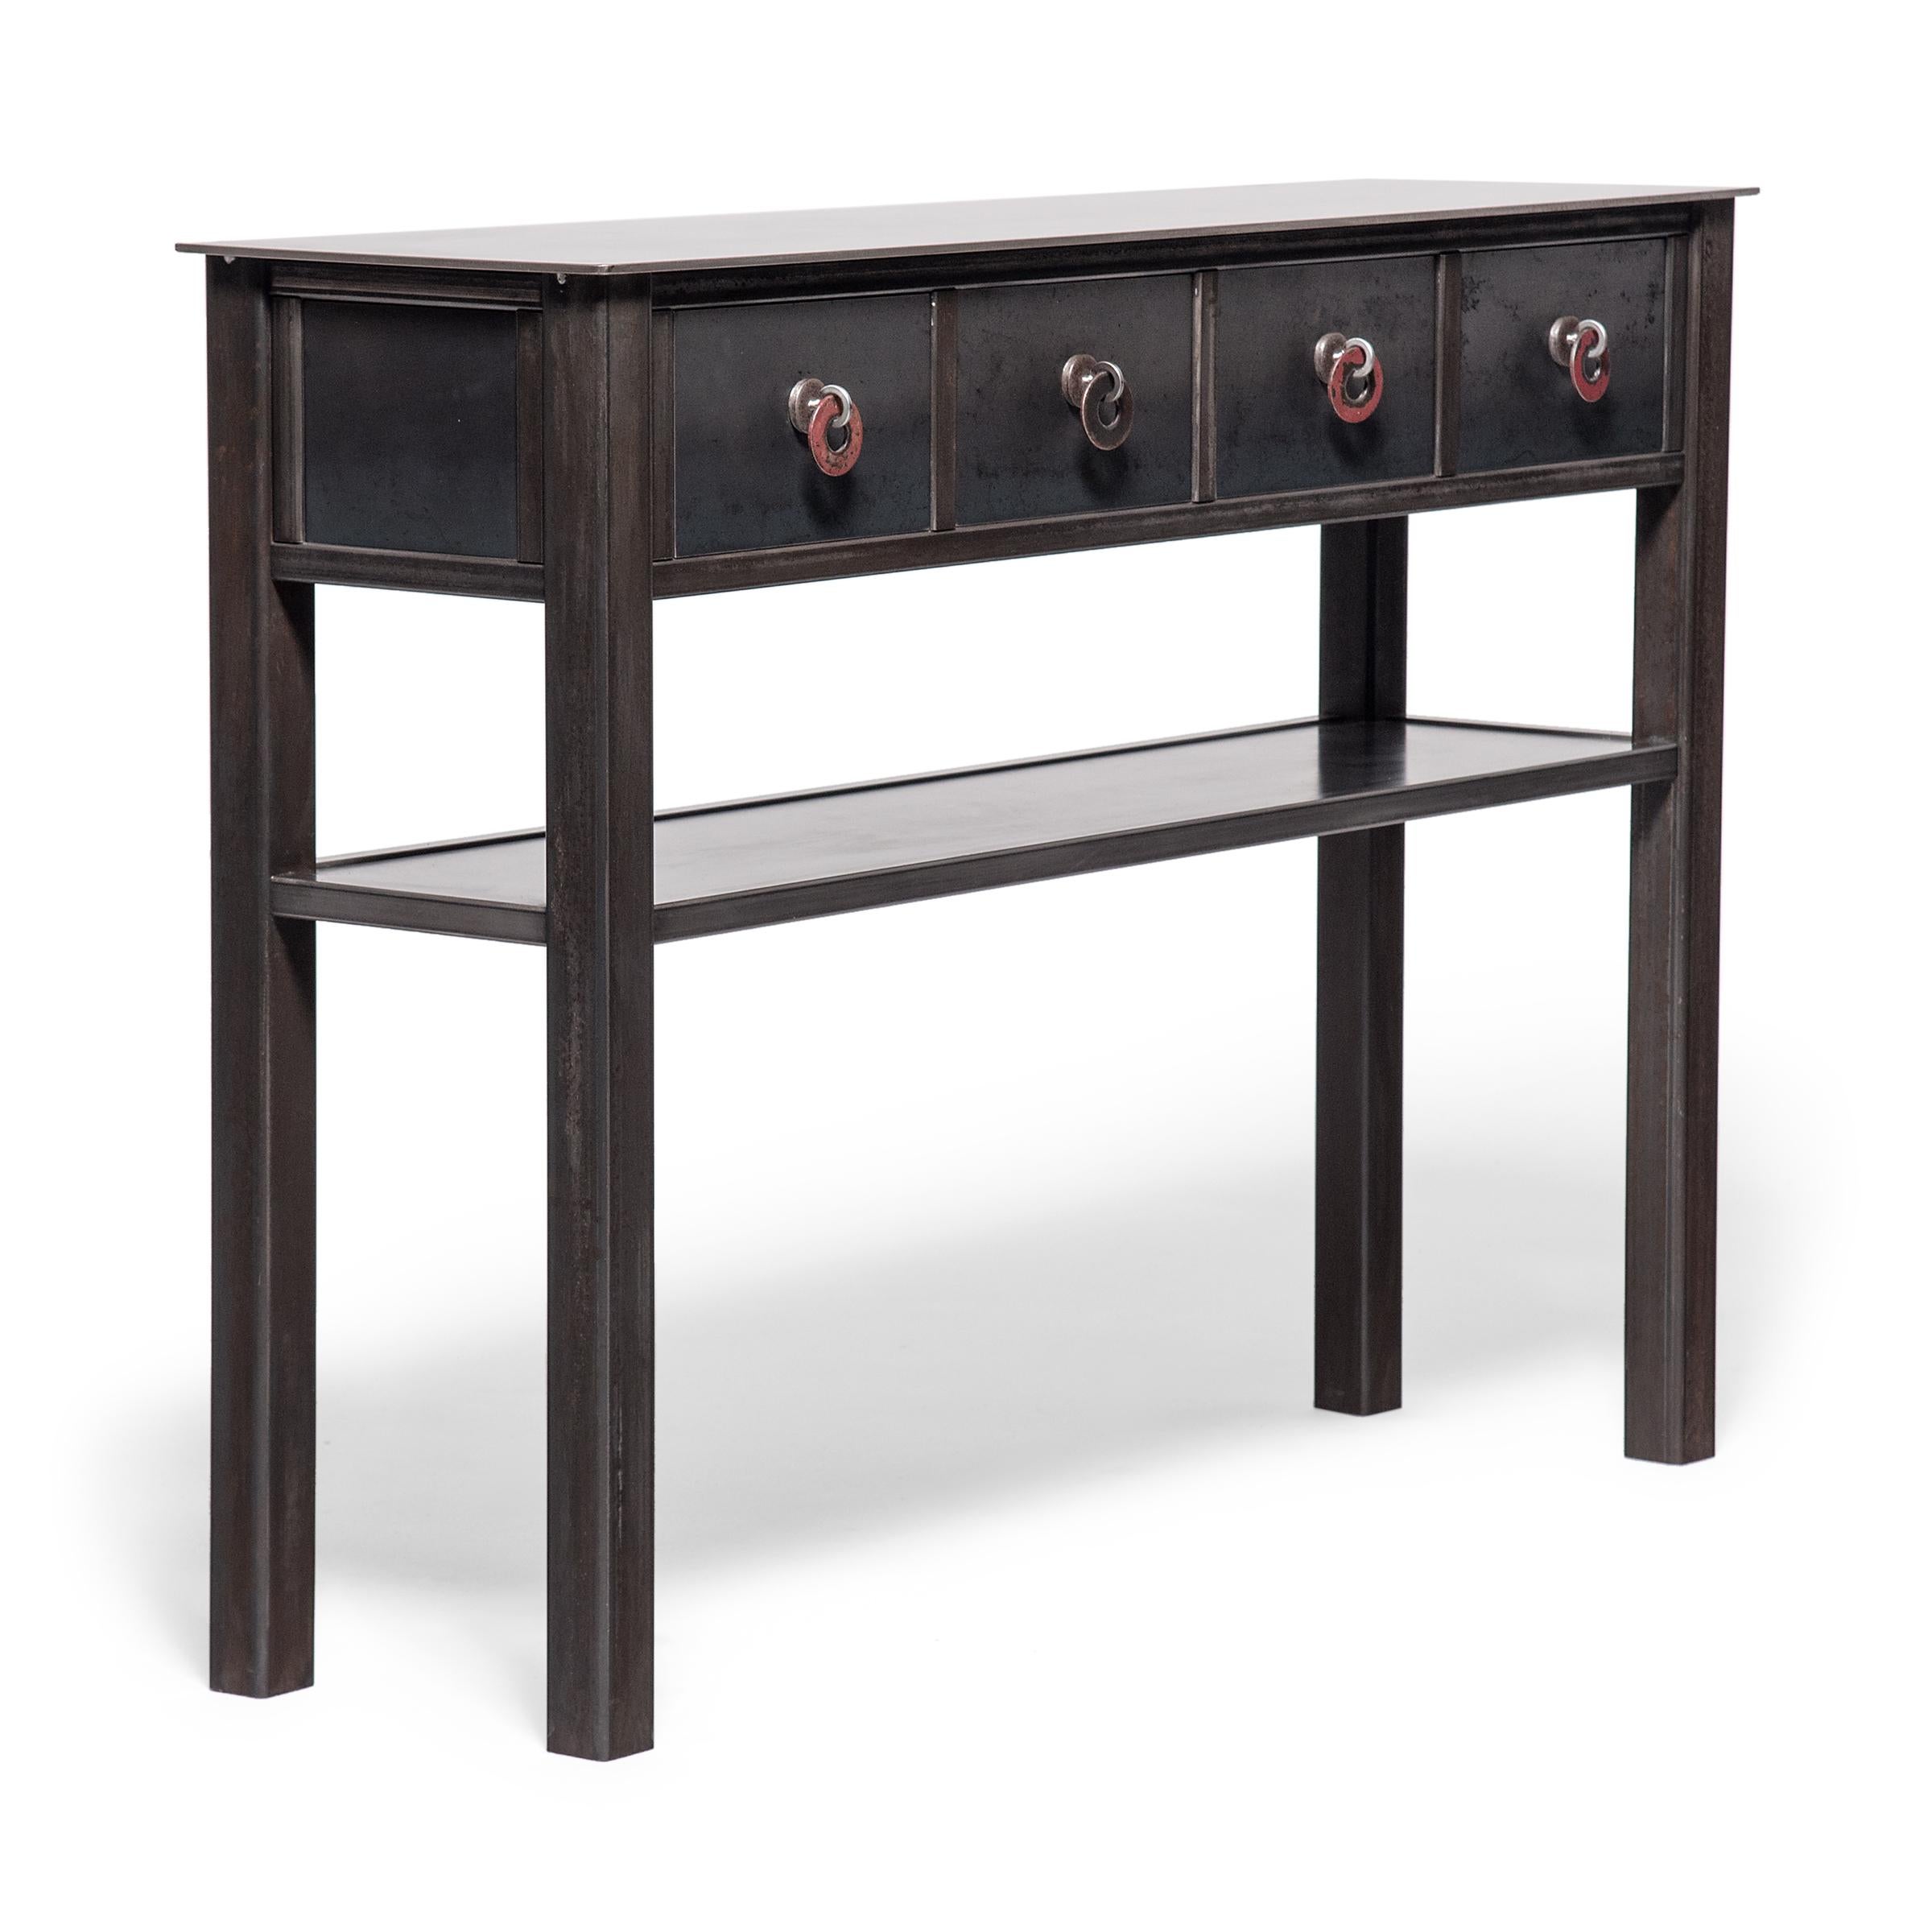 Shaker Jim Rose Ming Steel Four-Drawer Console Table